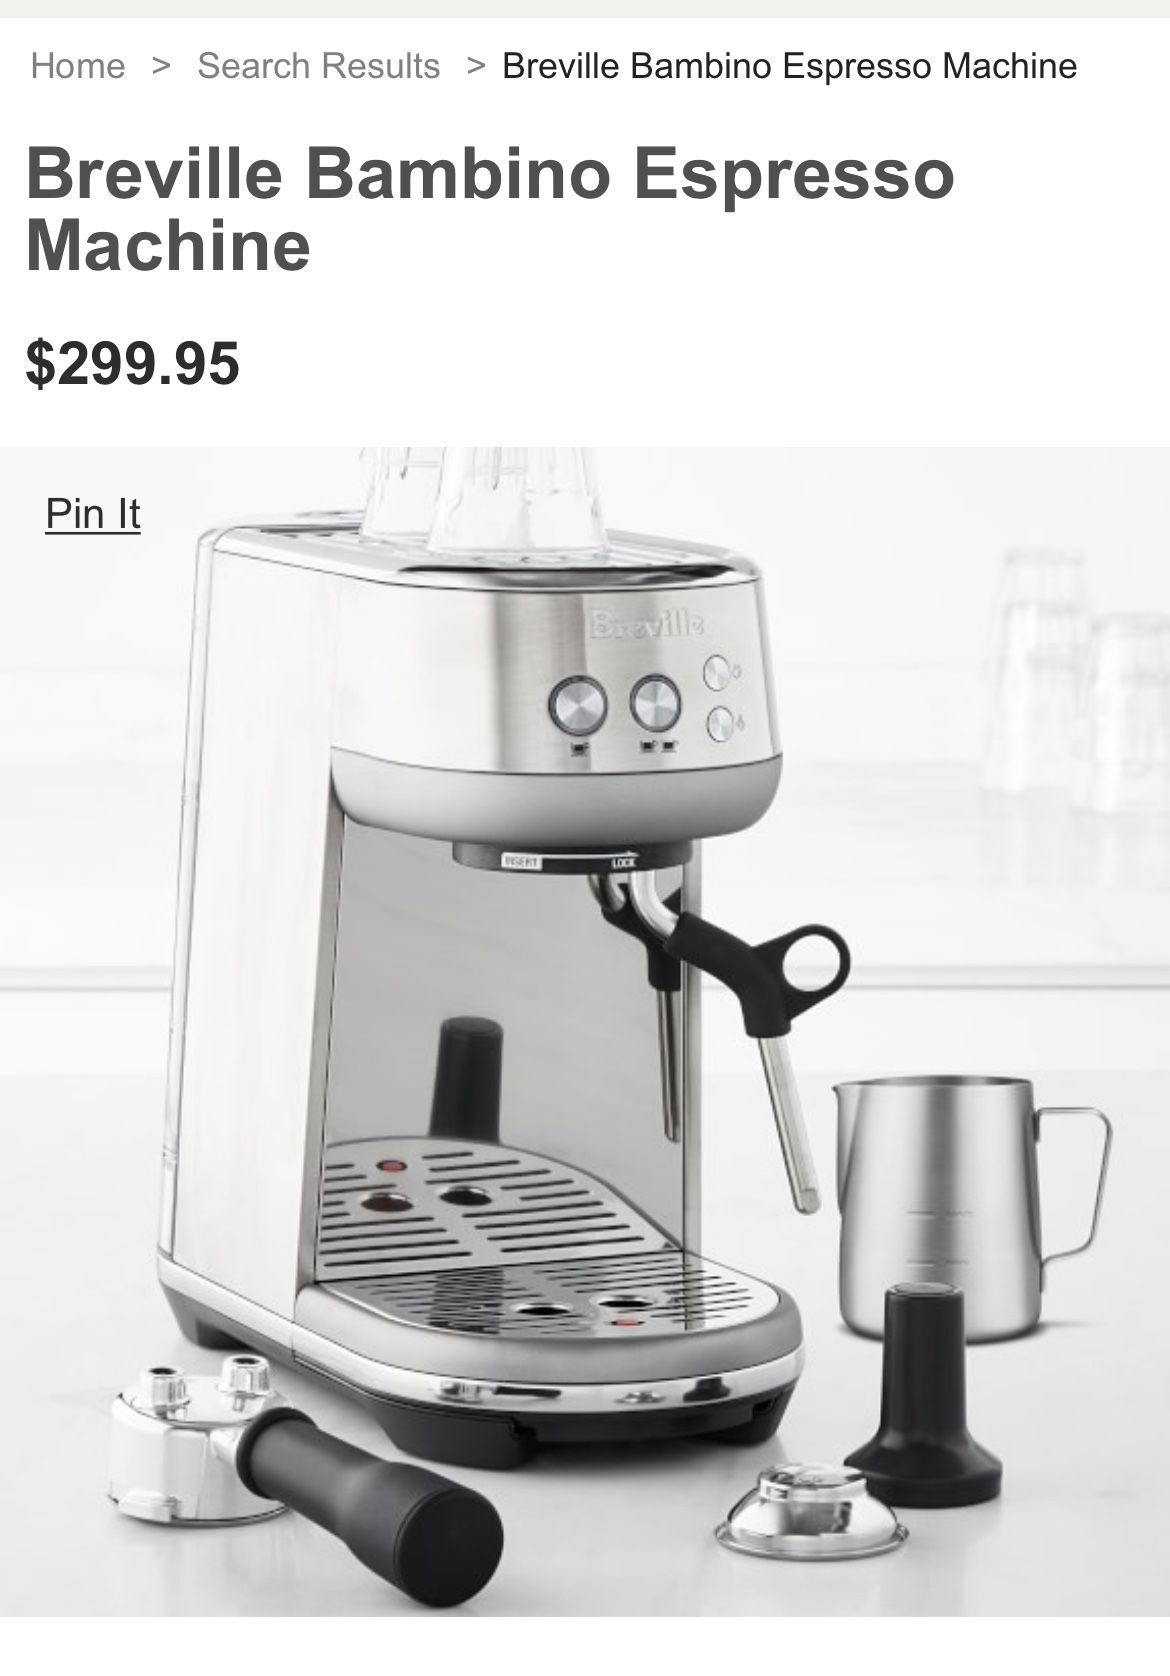 Breville milk cafe milk frother for Sale in Camas, WA - OfferUp